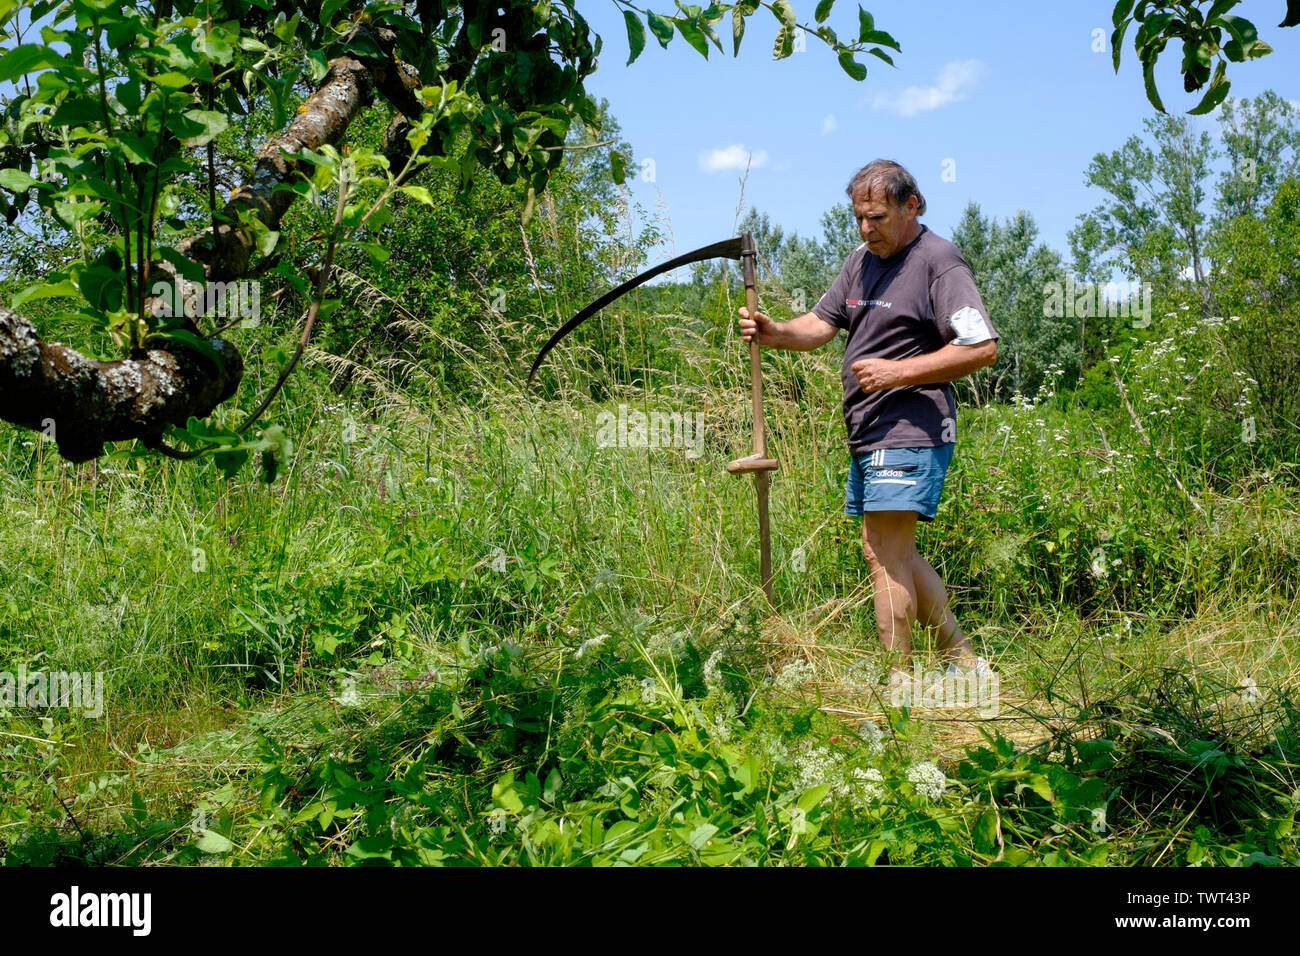 man using a traditional wooden handled scythe to manually cut down long grass and weeds in a rural garden zala county hungary Stock Photo